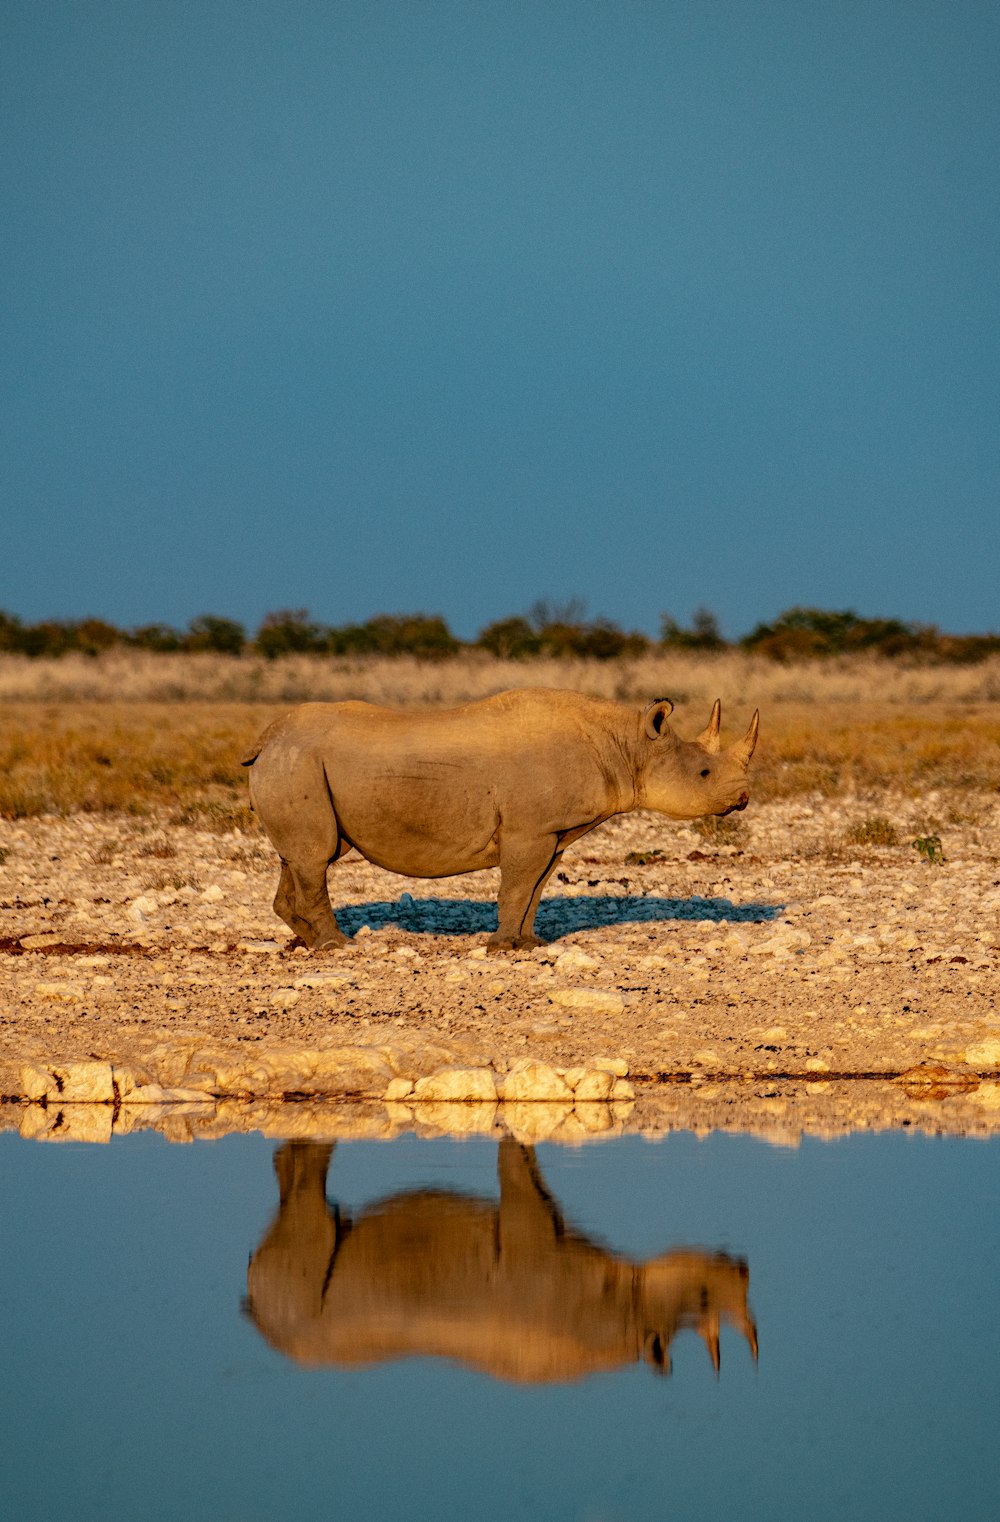 a rhino standing in a field next to a body of water